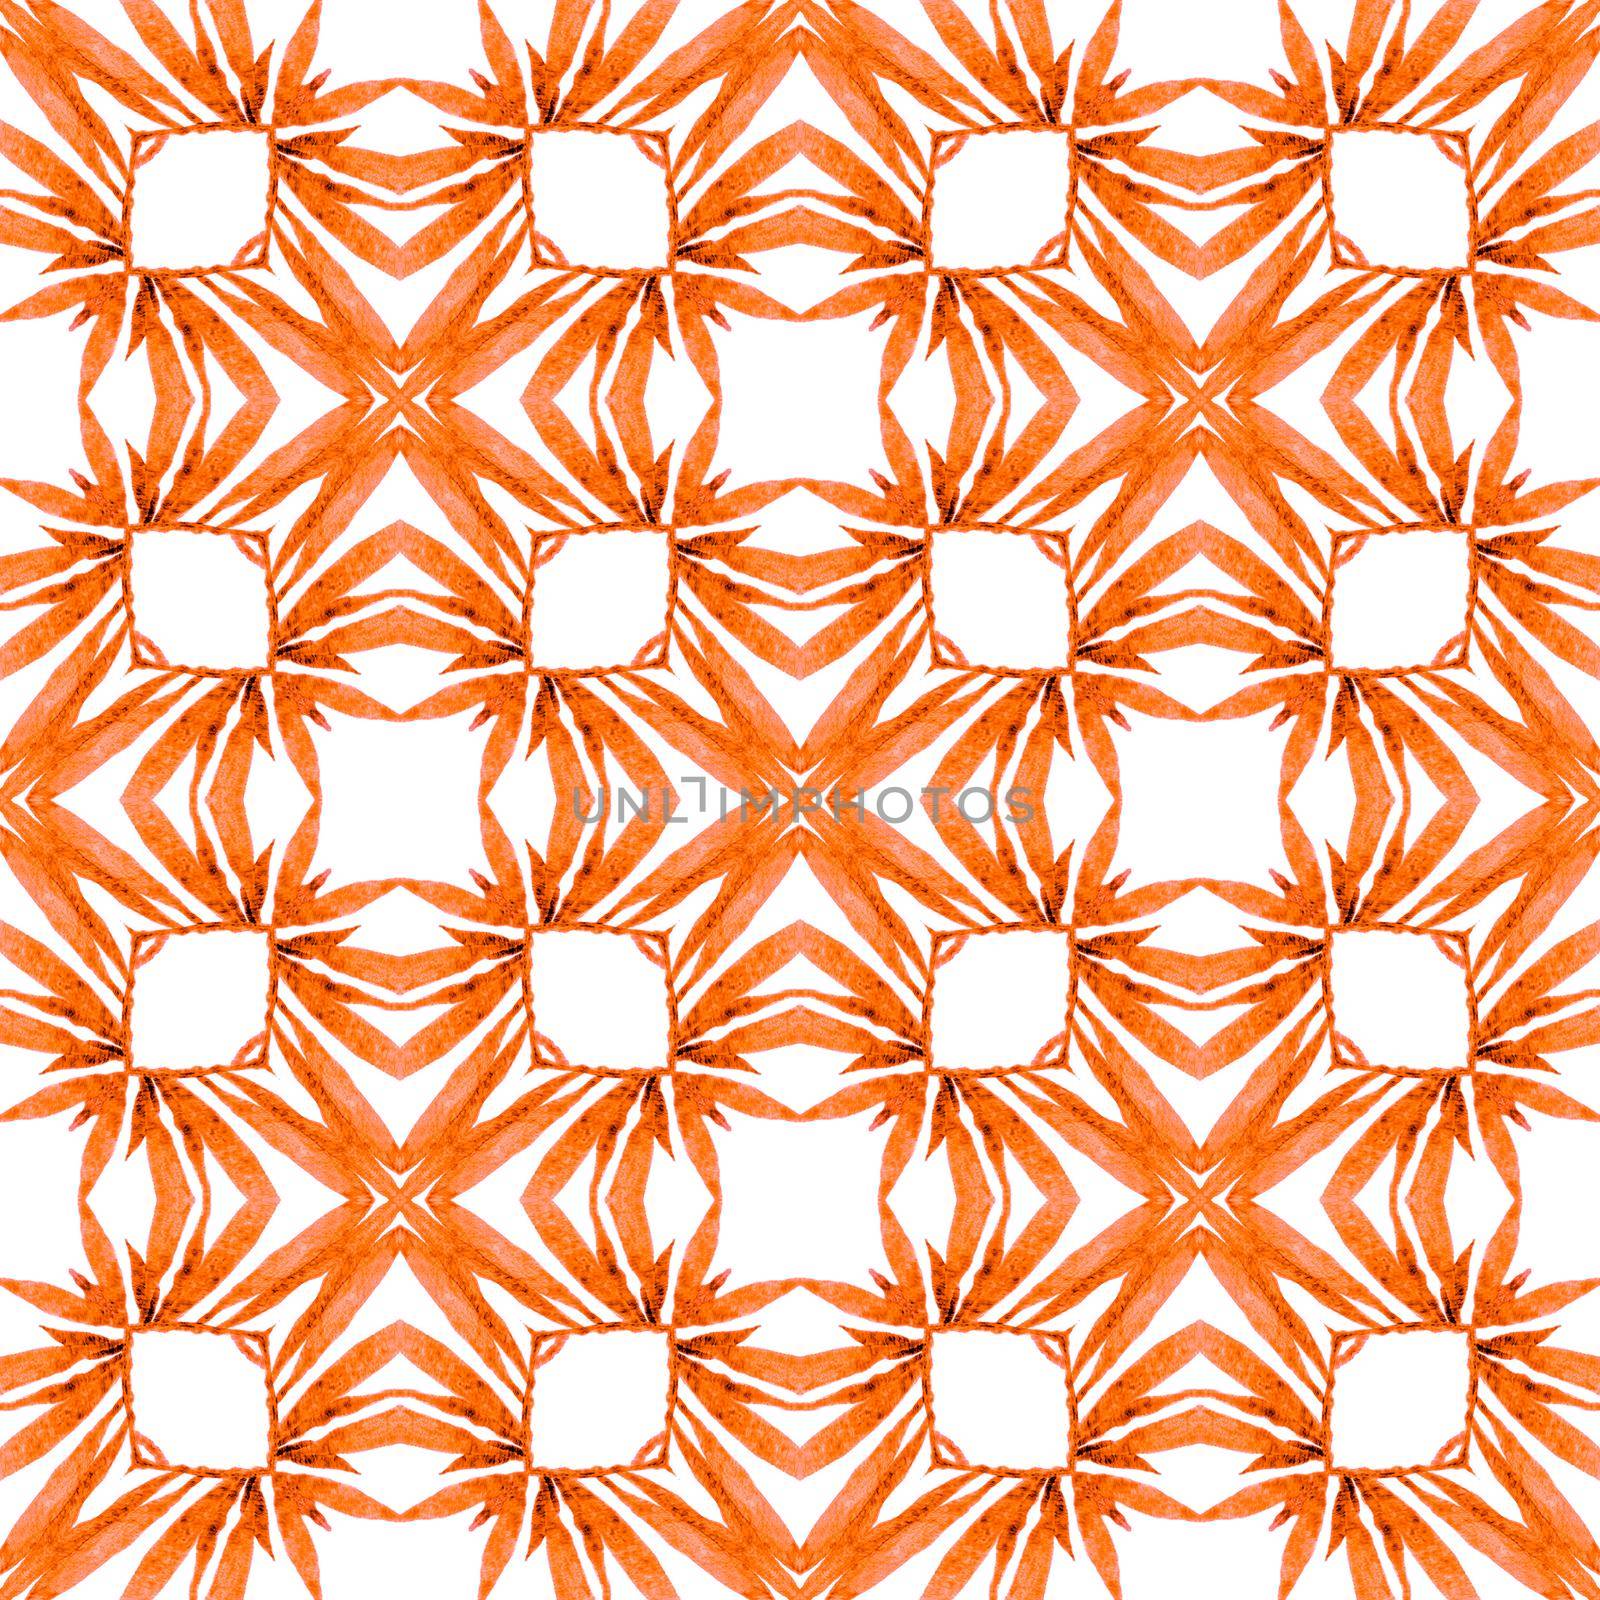 Textile ready immaculate print, swimwear fabric, wallpaper, wrapping. Orange sightly boho chic summer design. Summer exotic seamless border. Exotic seamless pattern.